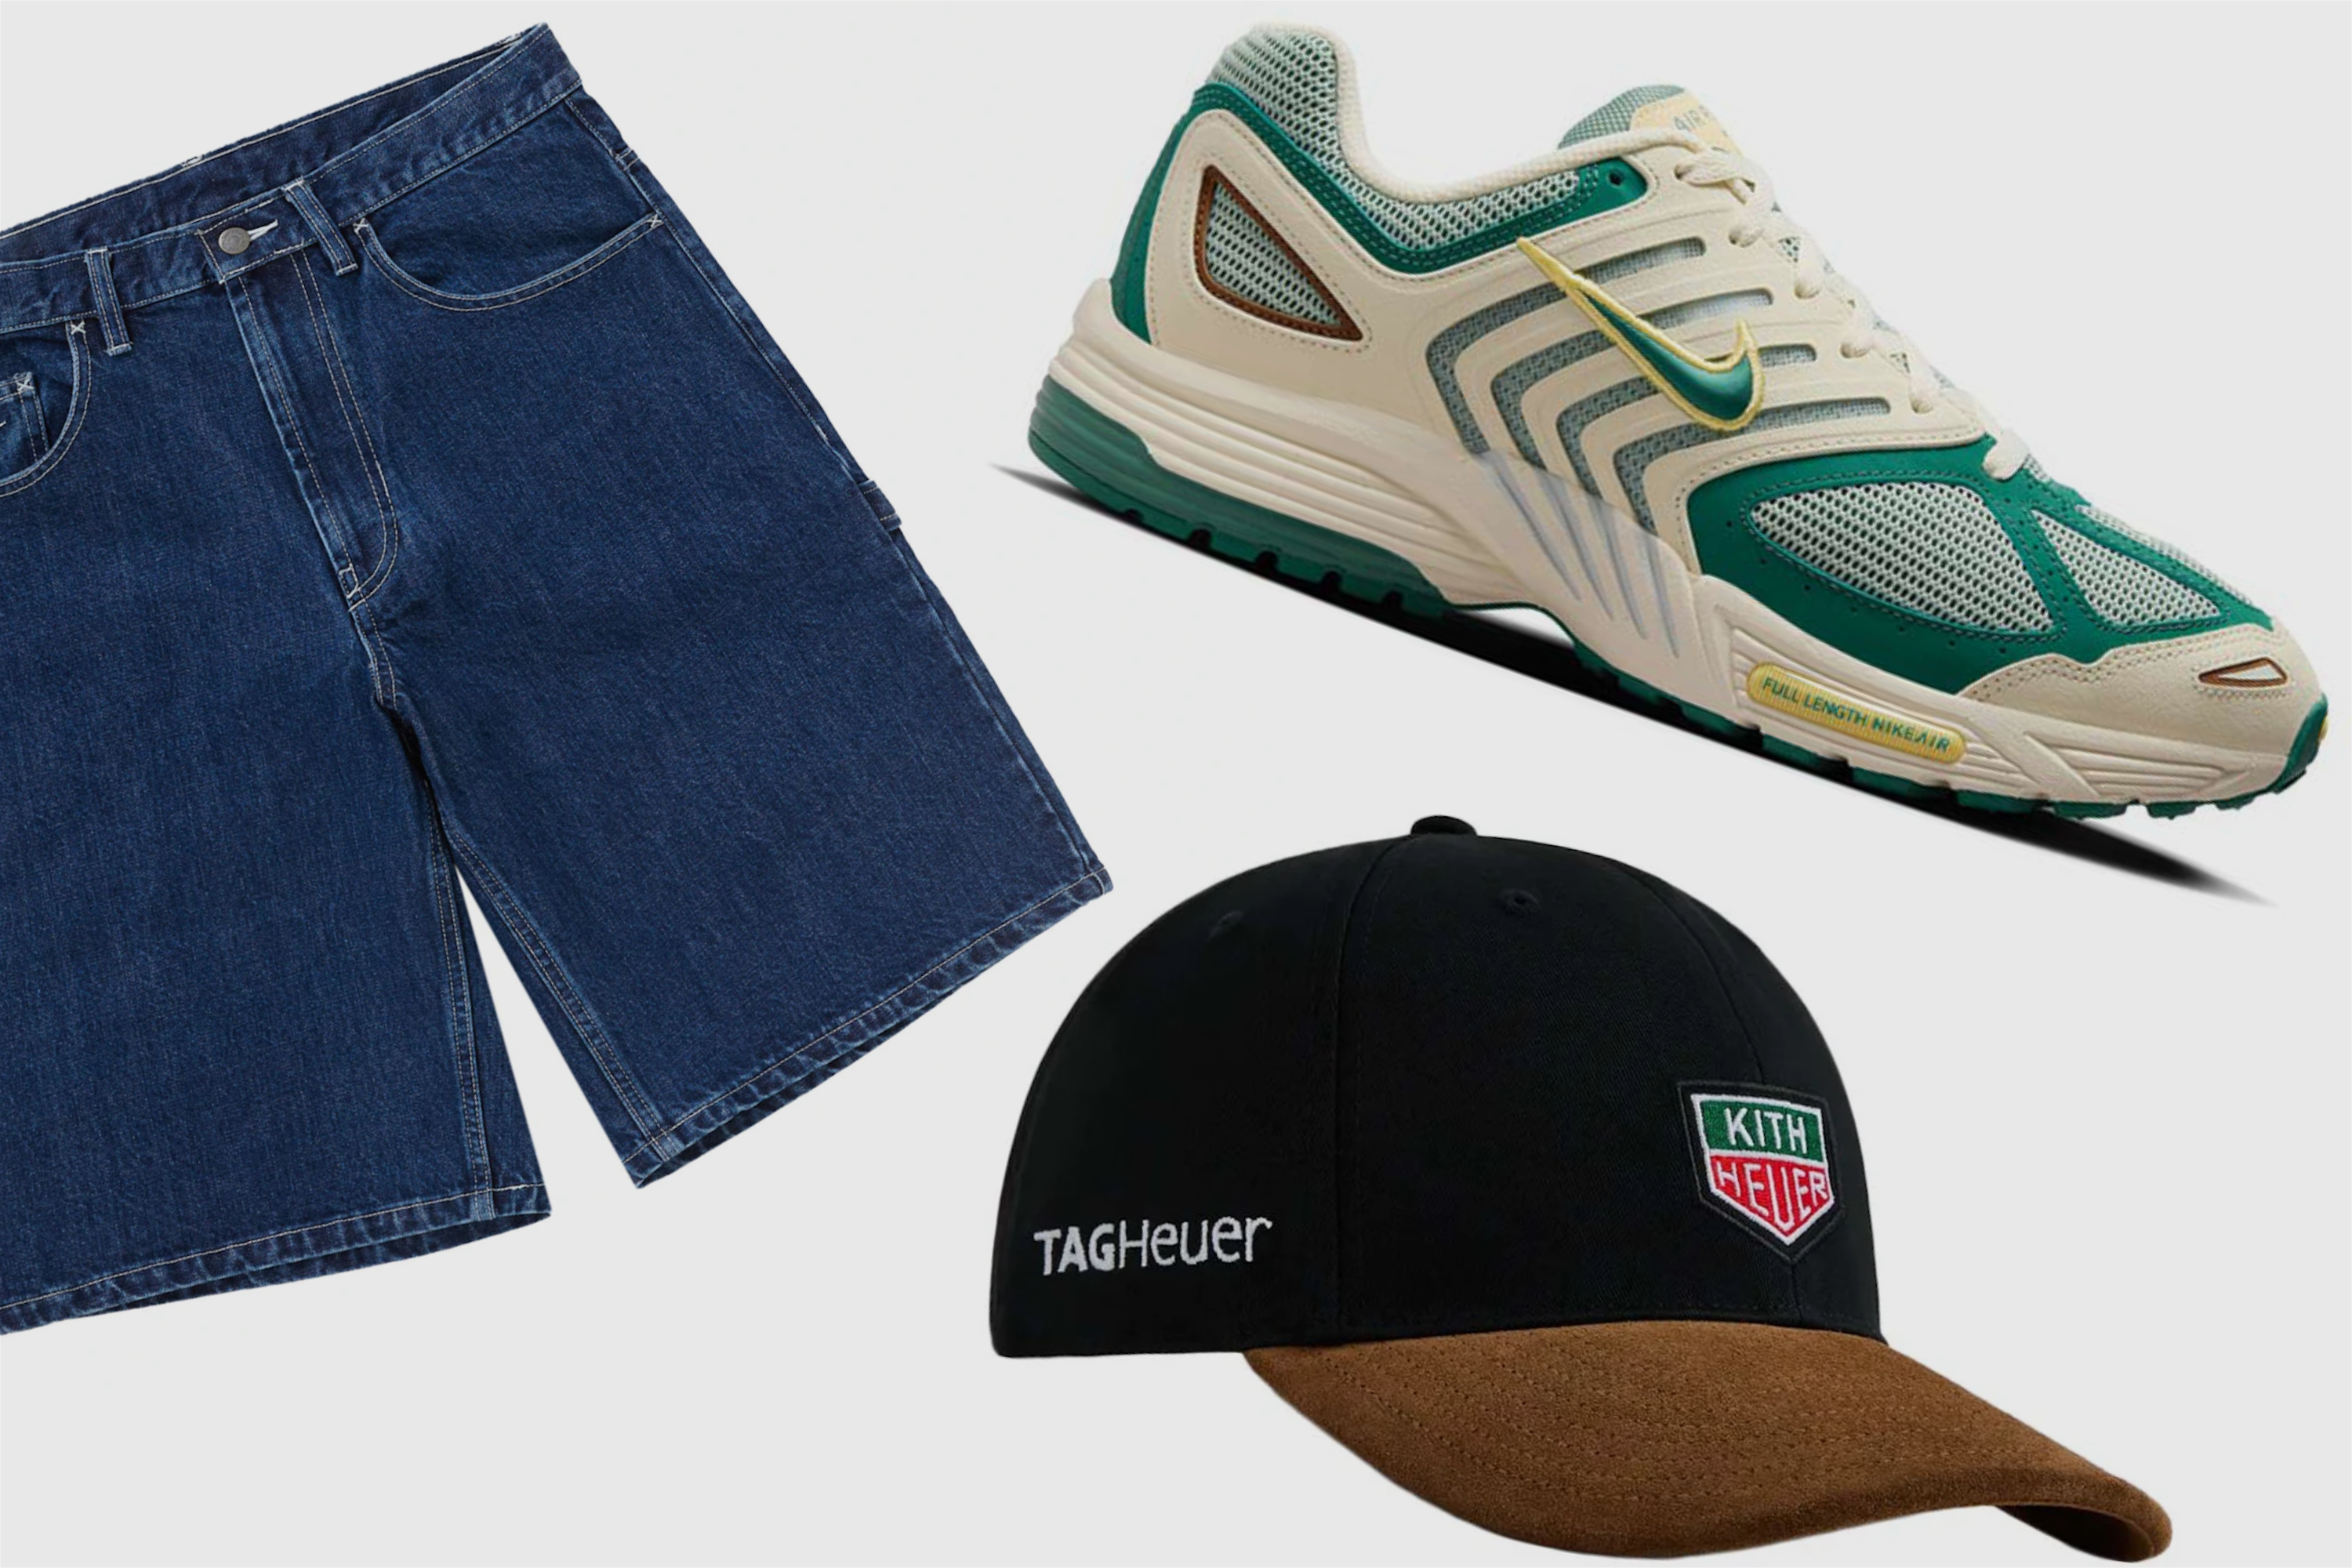 Dad Style Dadcore Nike Tag Heuer Kith Supreme Fathers Day Gift Guide Margiela